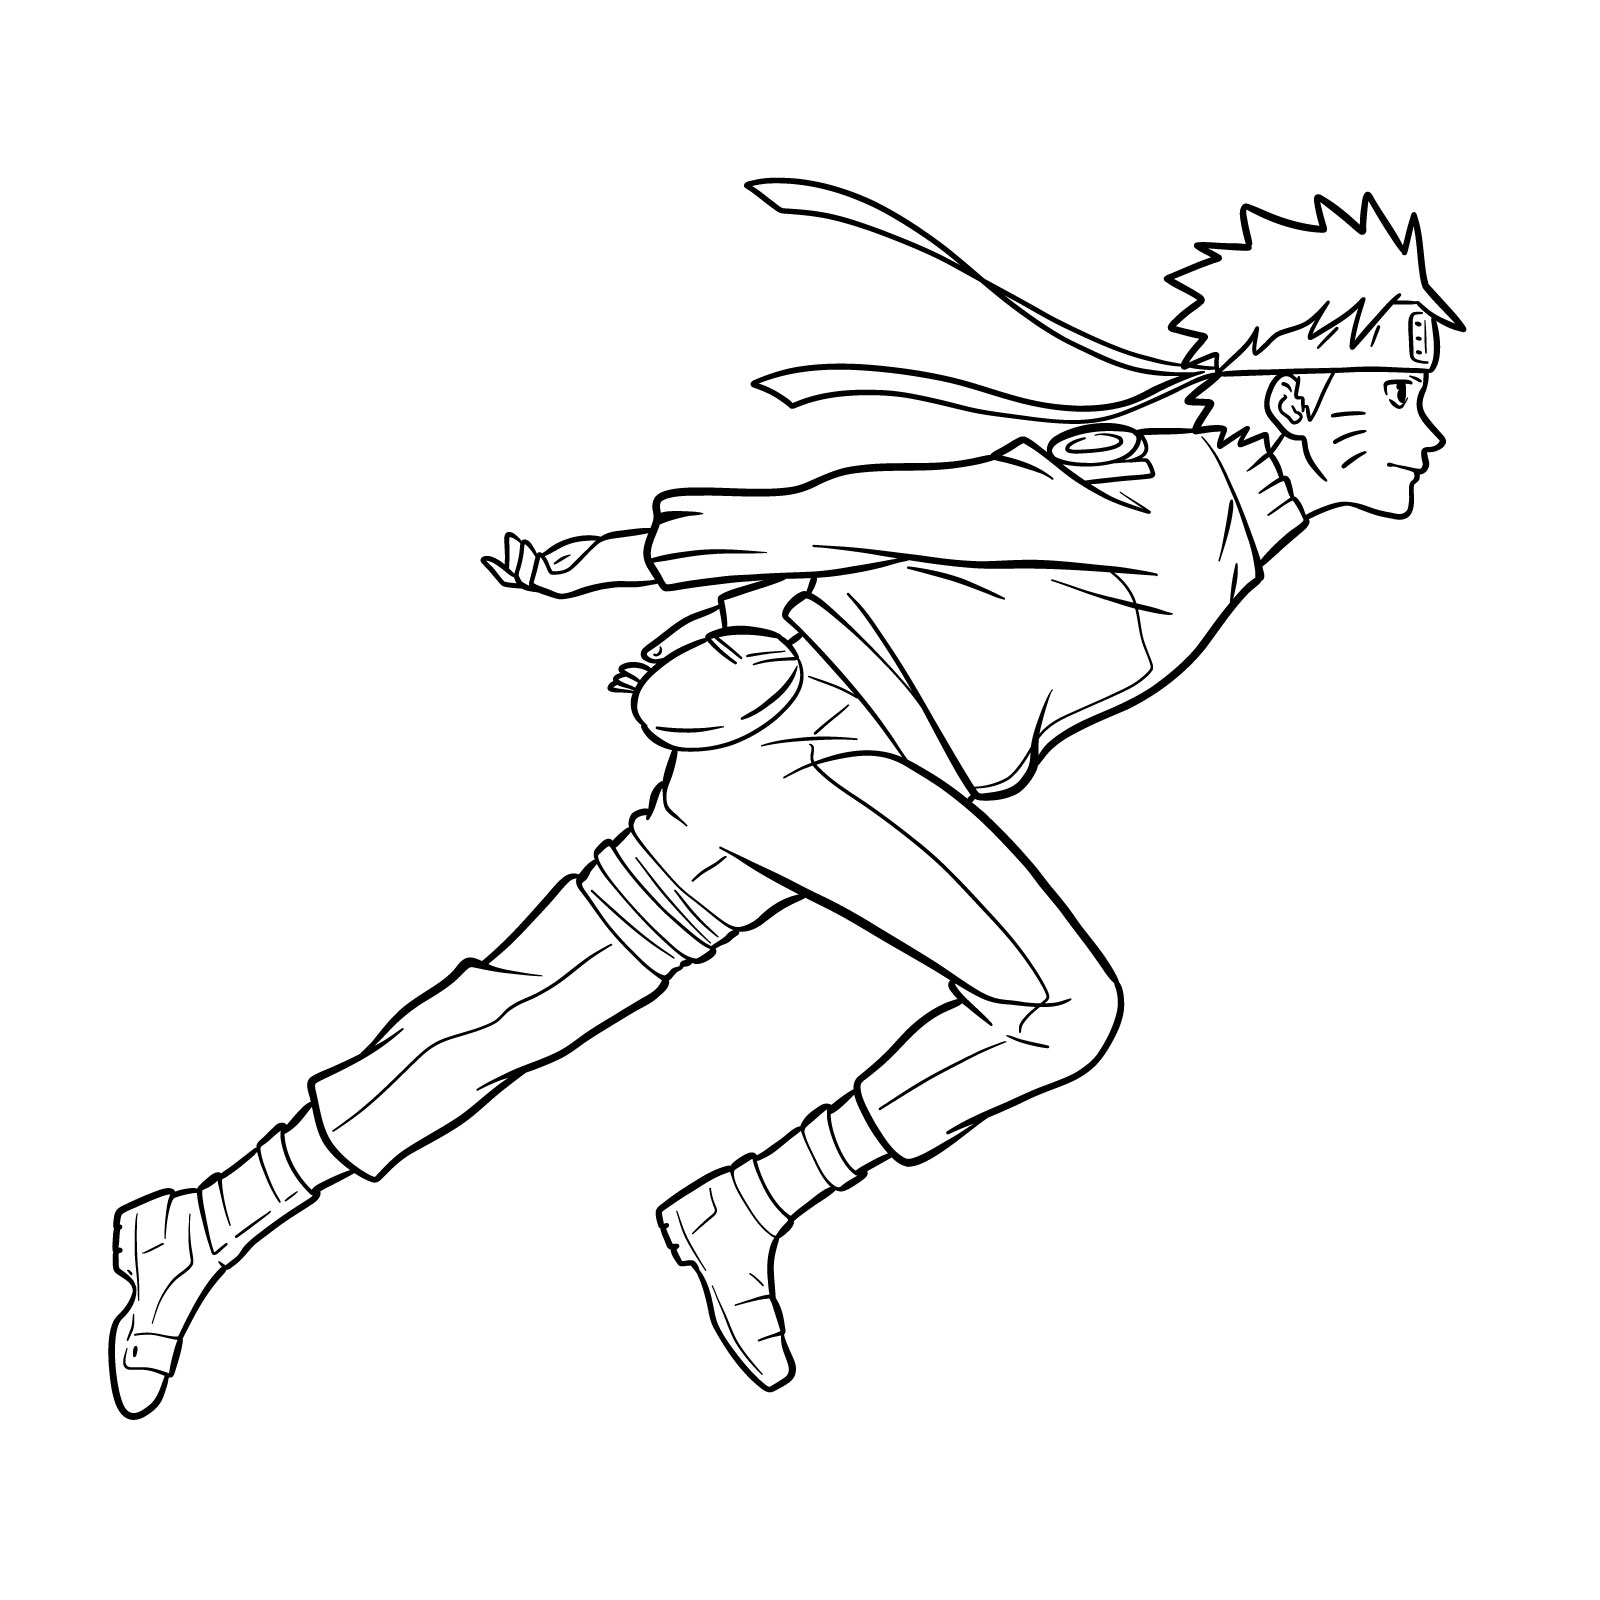 How to draw Naruto running - final step